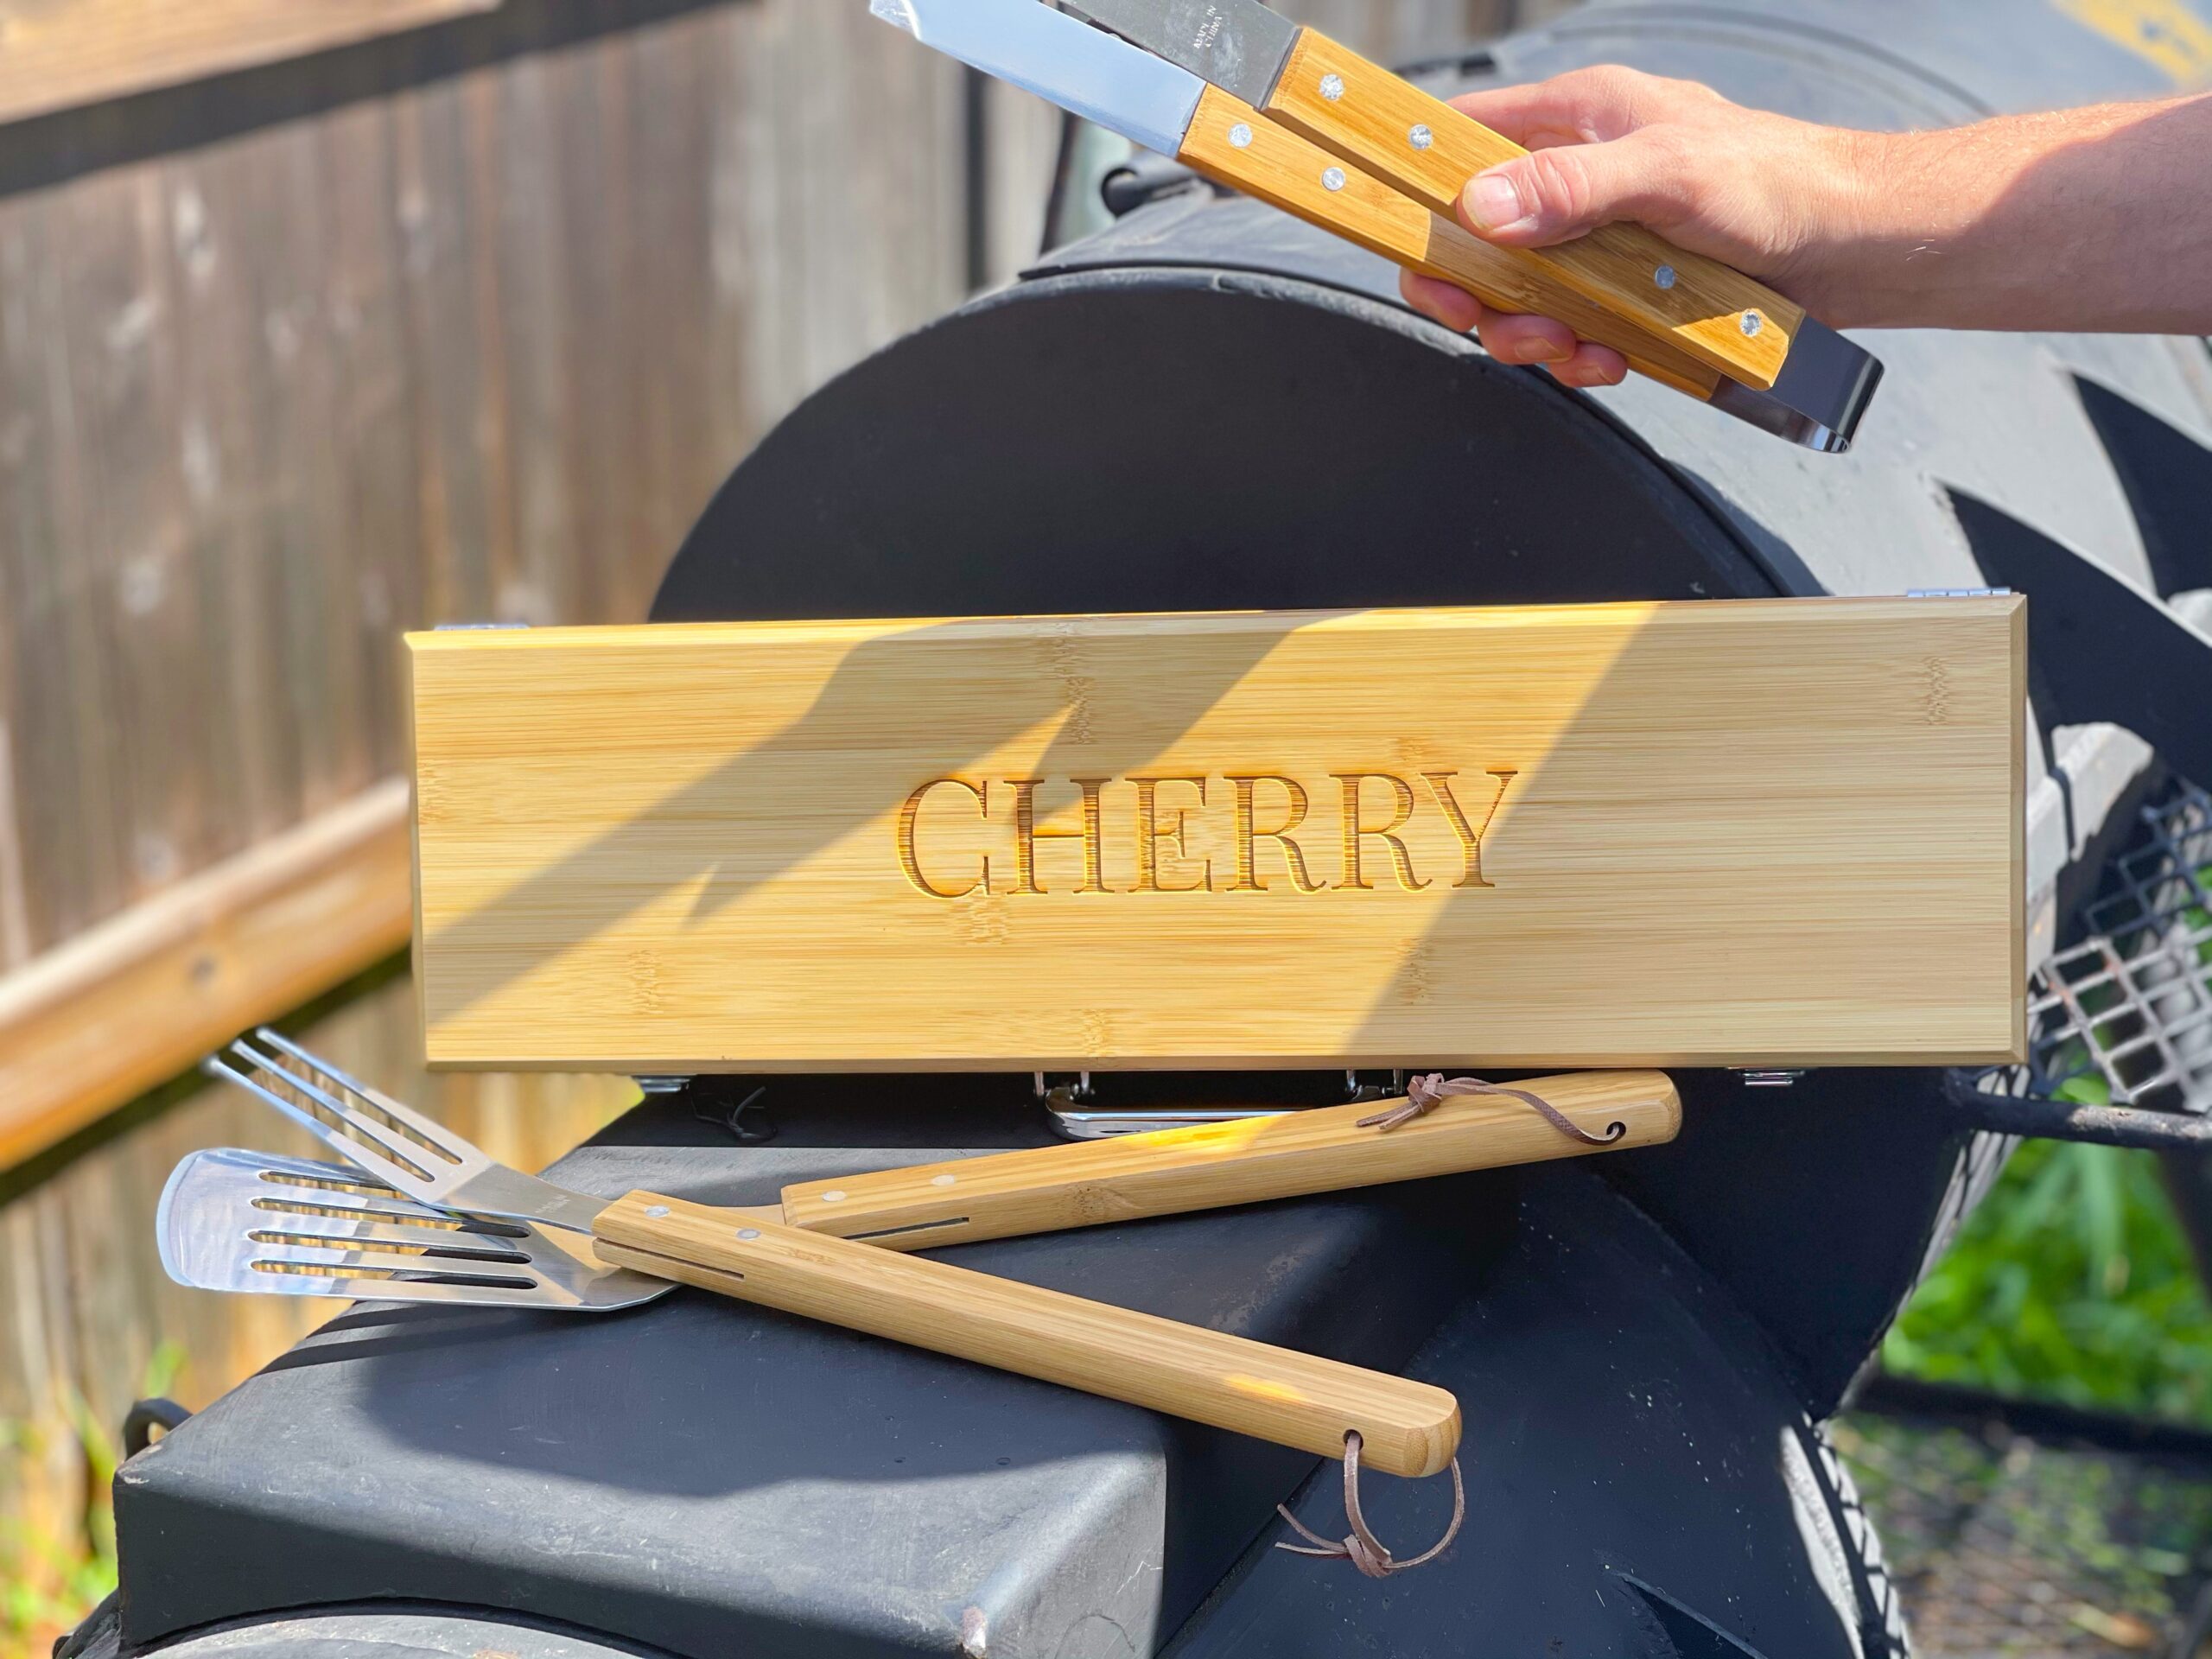 Fathers Day gift for grill, bbq gifts